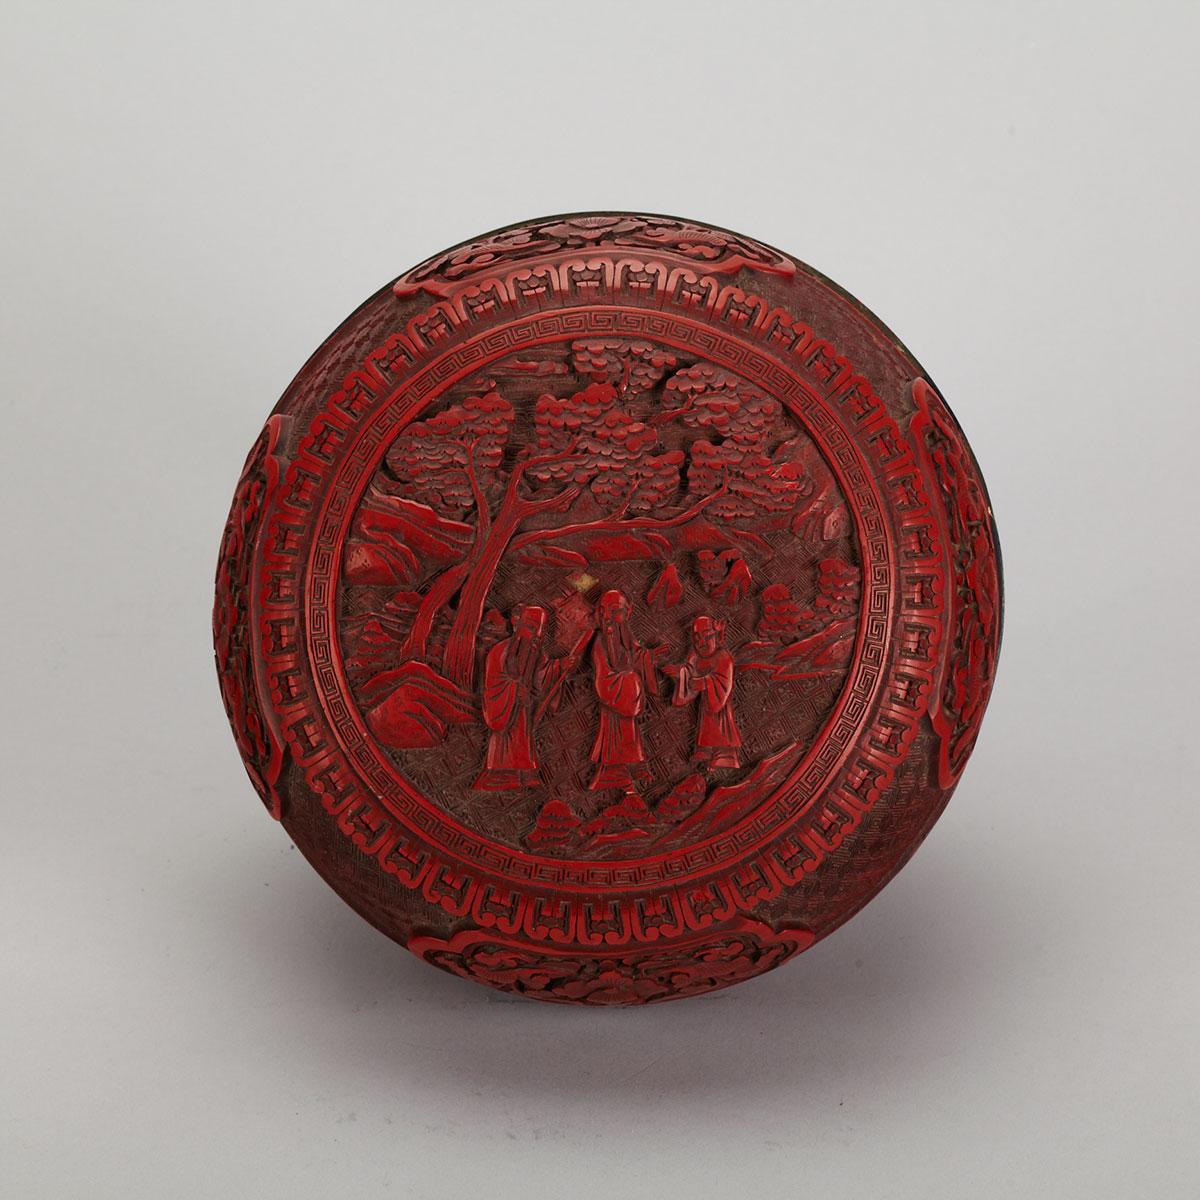 Carved Cinnabar Lacquer Box, 19th Century